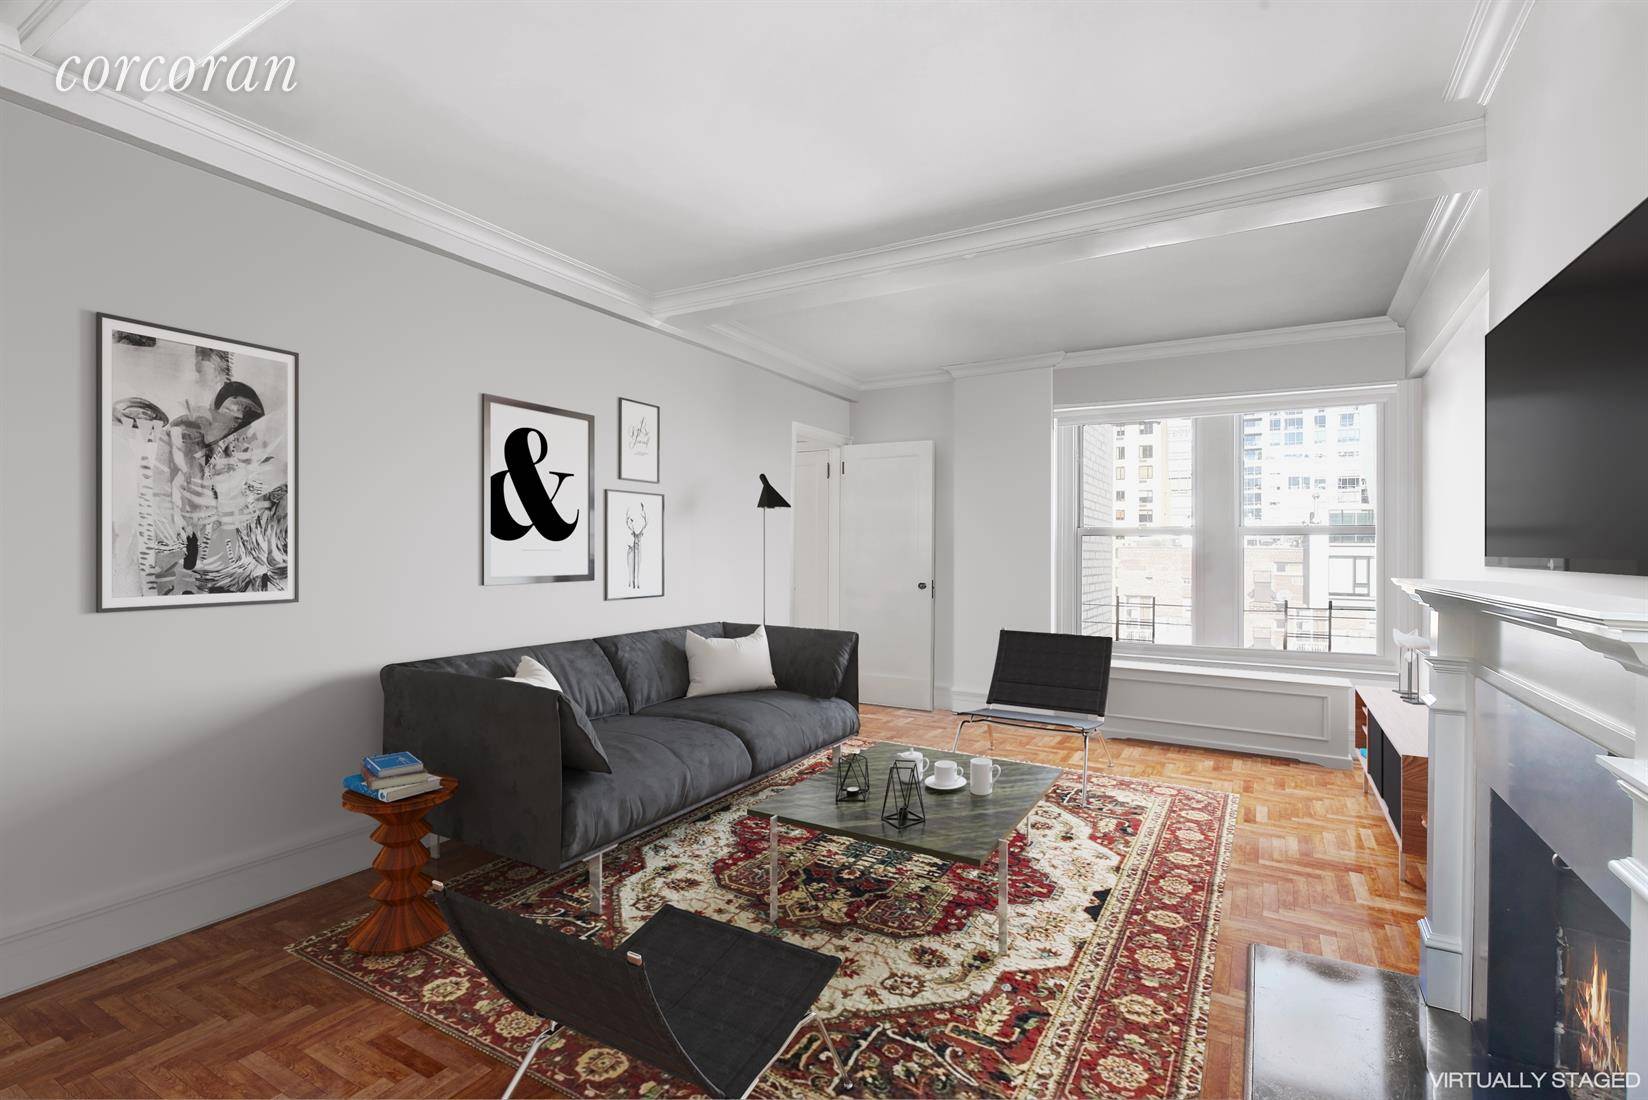 Meticulously renovated 2 bedroom, 2 bathroom located on a quiet tree lined street in the heart of the Upper East Side.